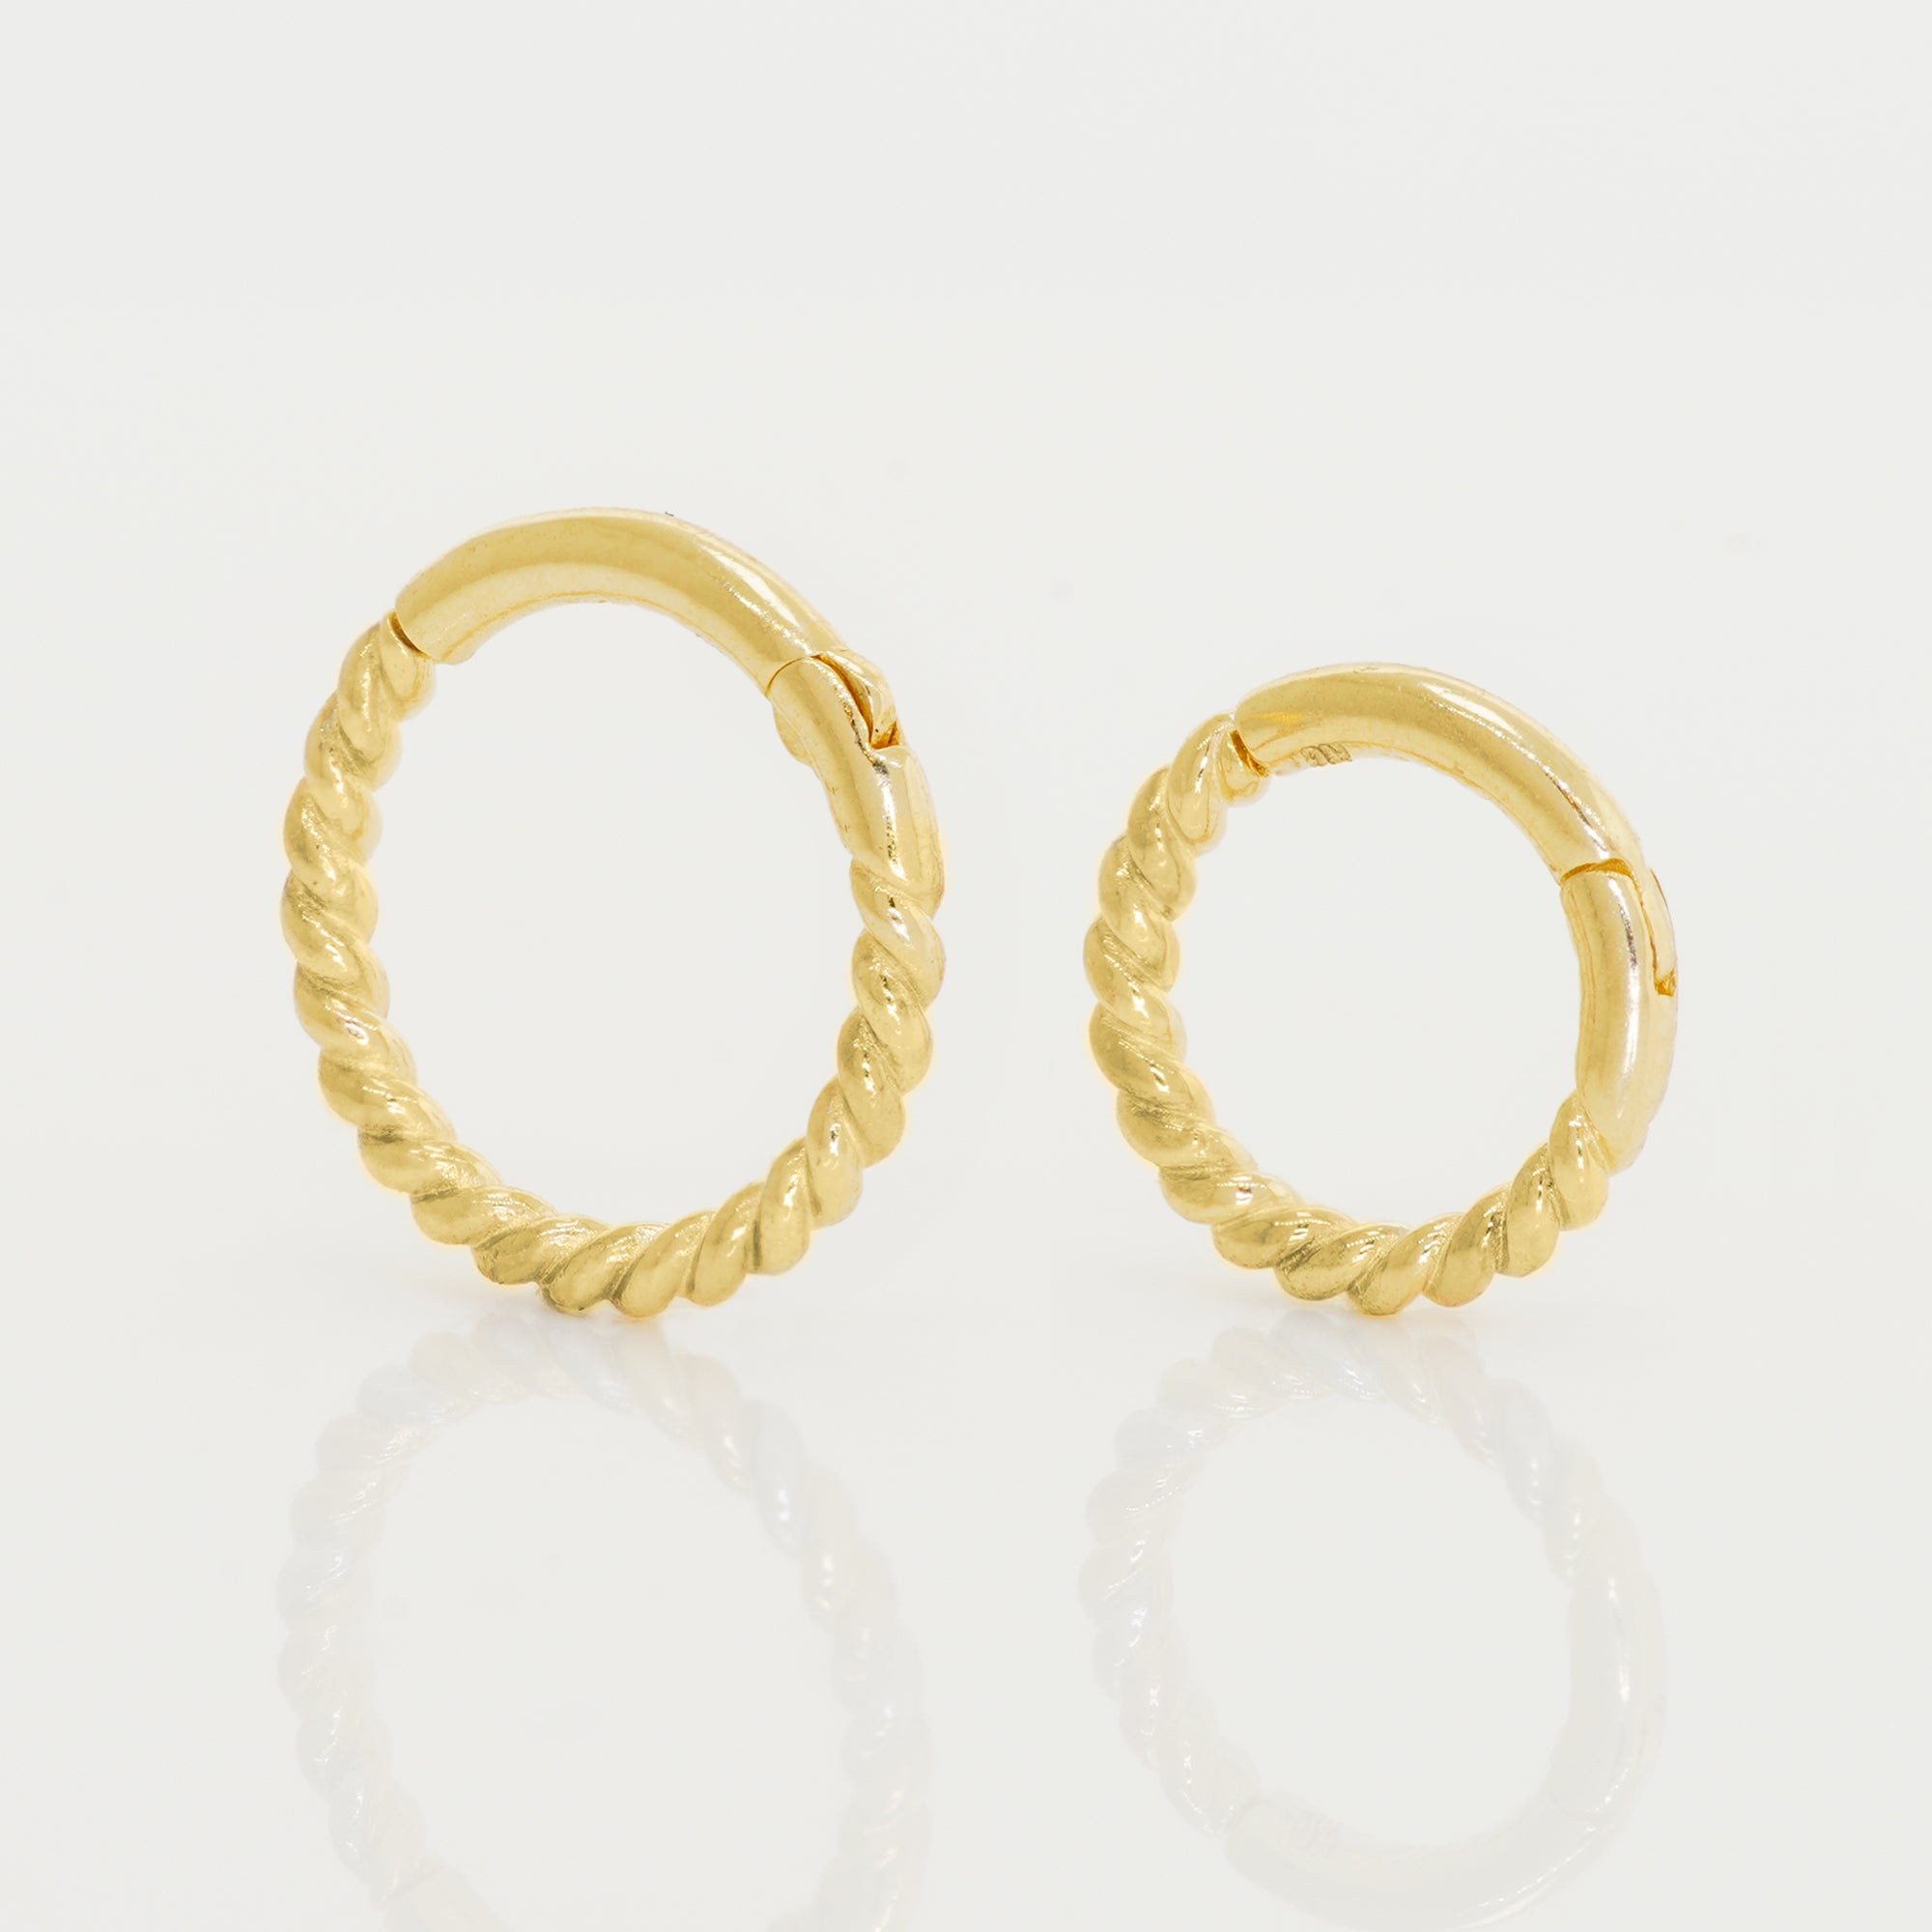 14K Solid Gold Twisted Rope Hoop Piercing - Anygolds 